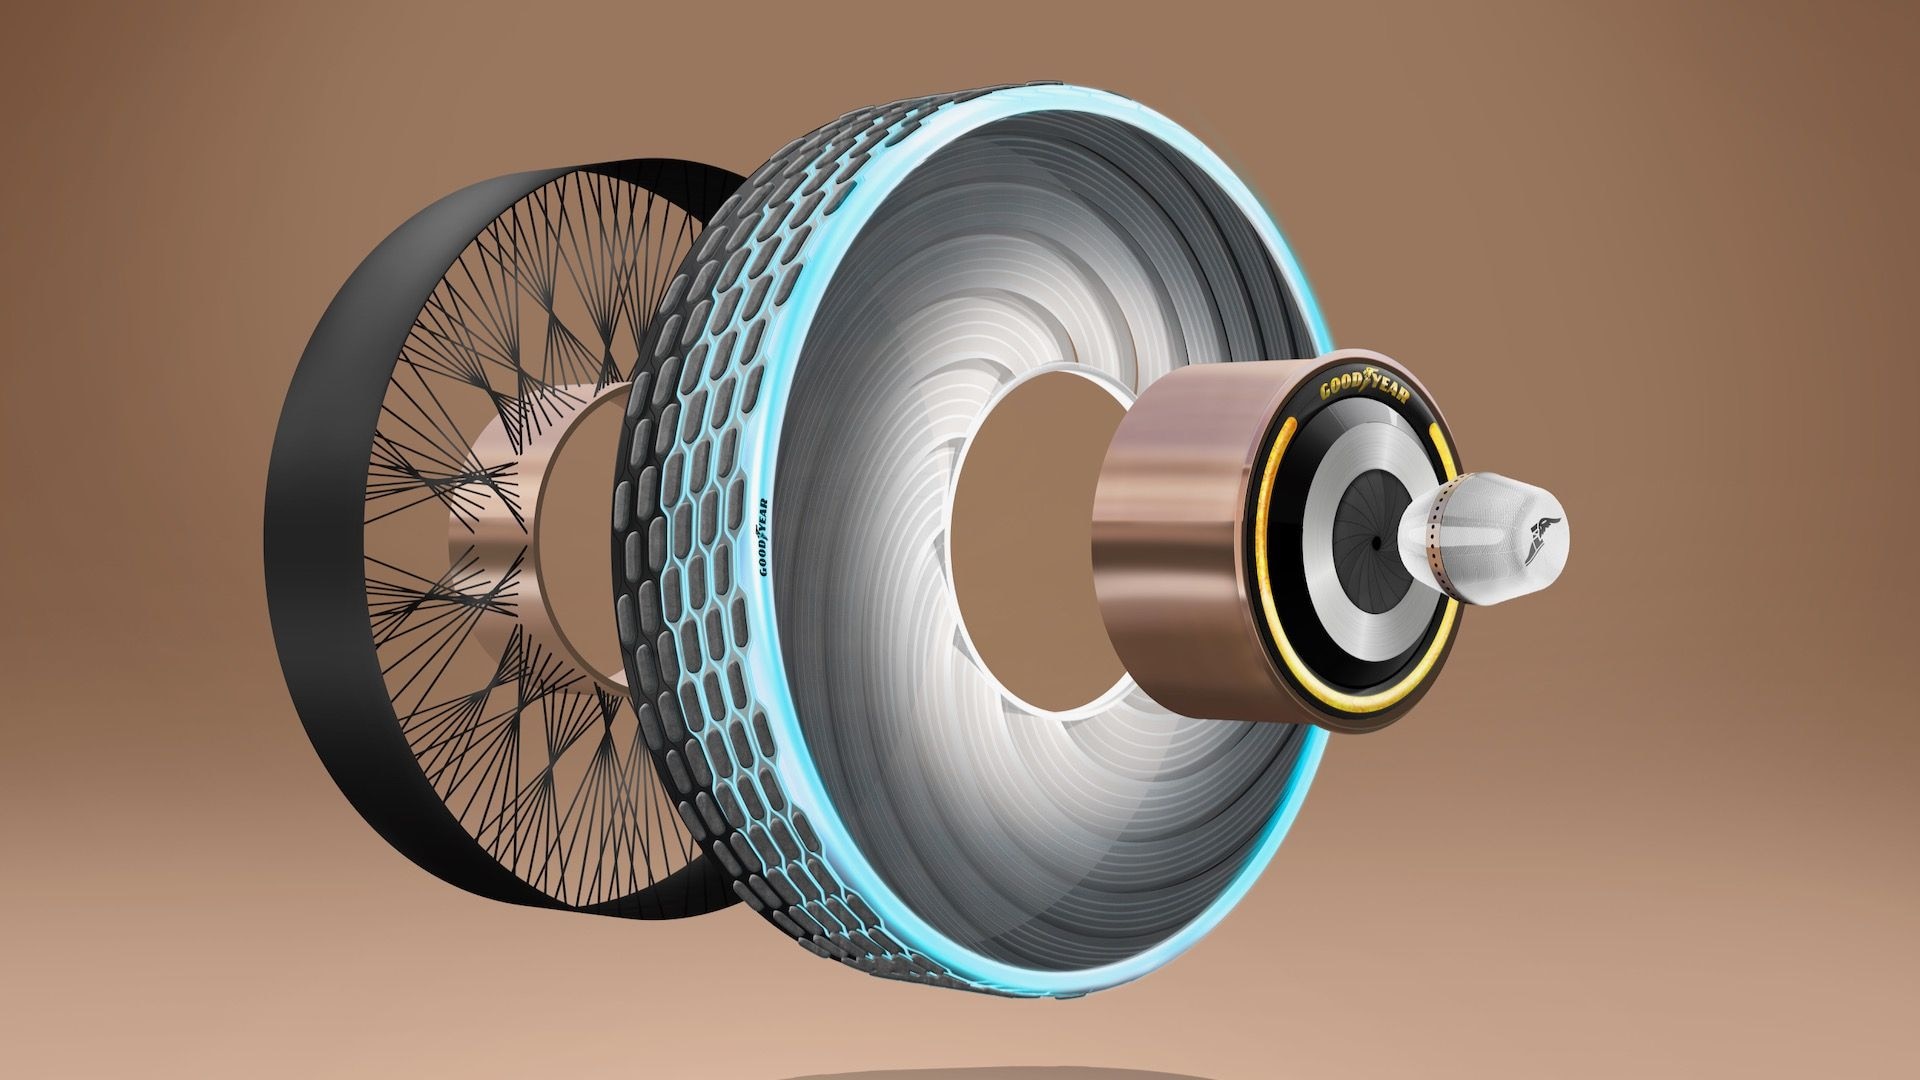 Goodyear ReCharge concept